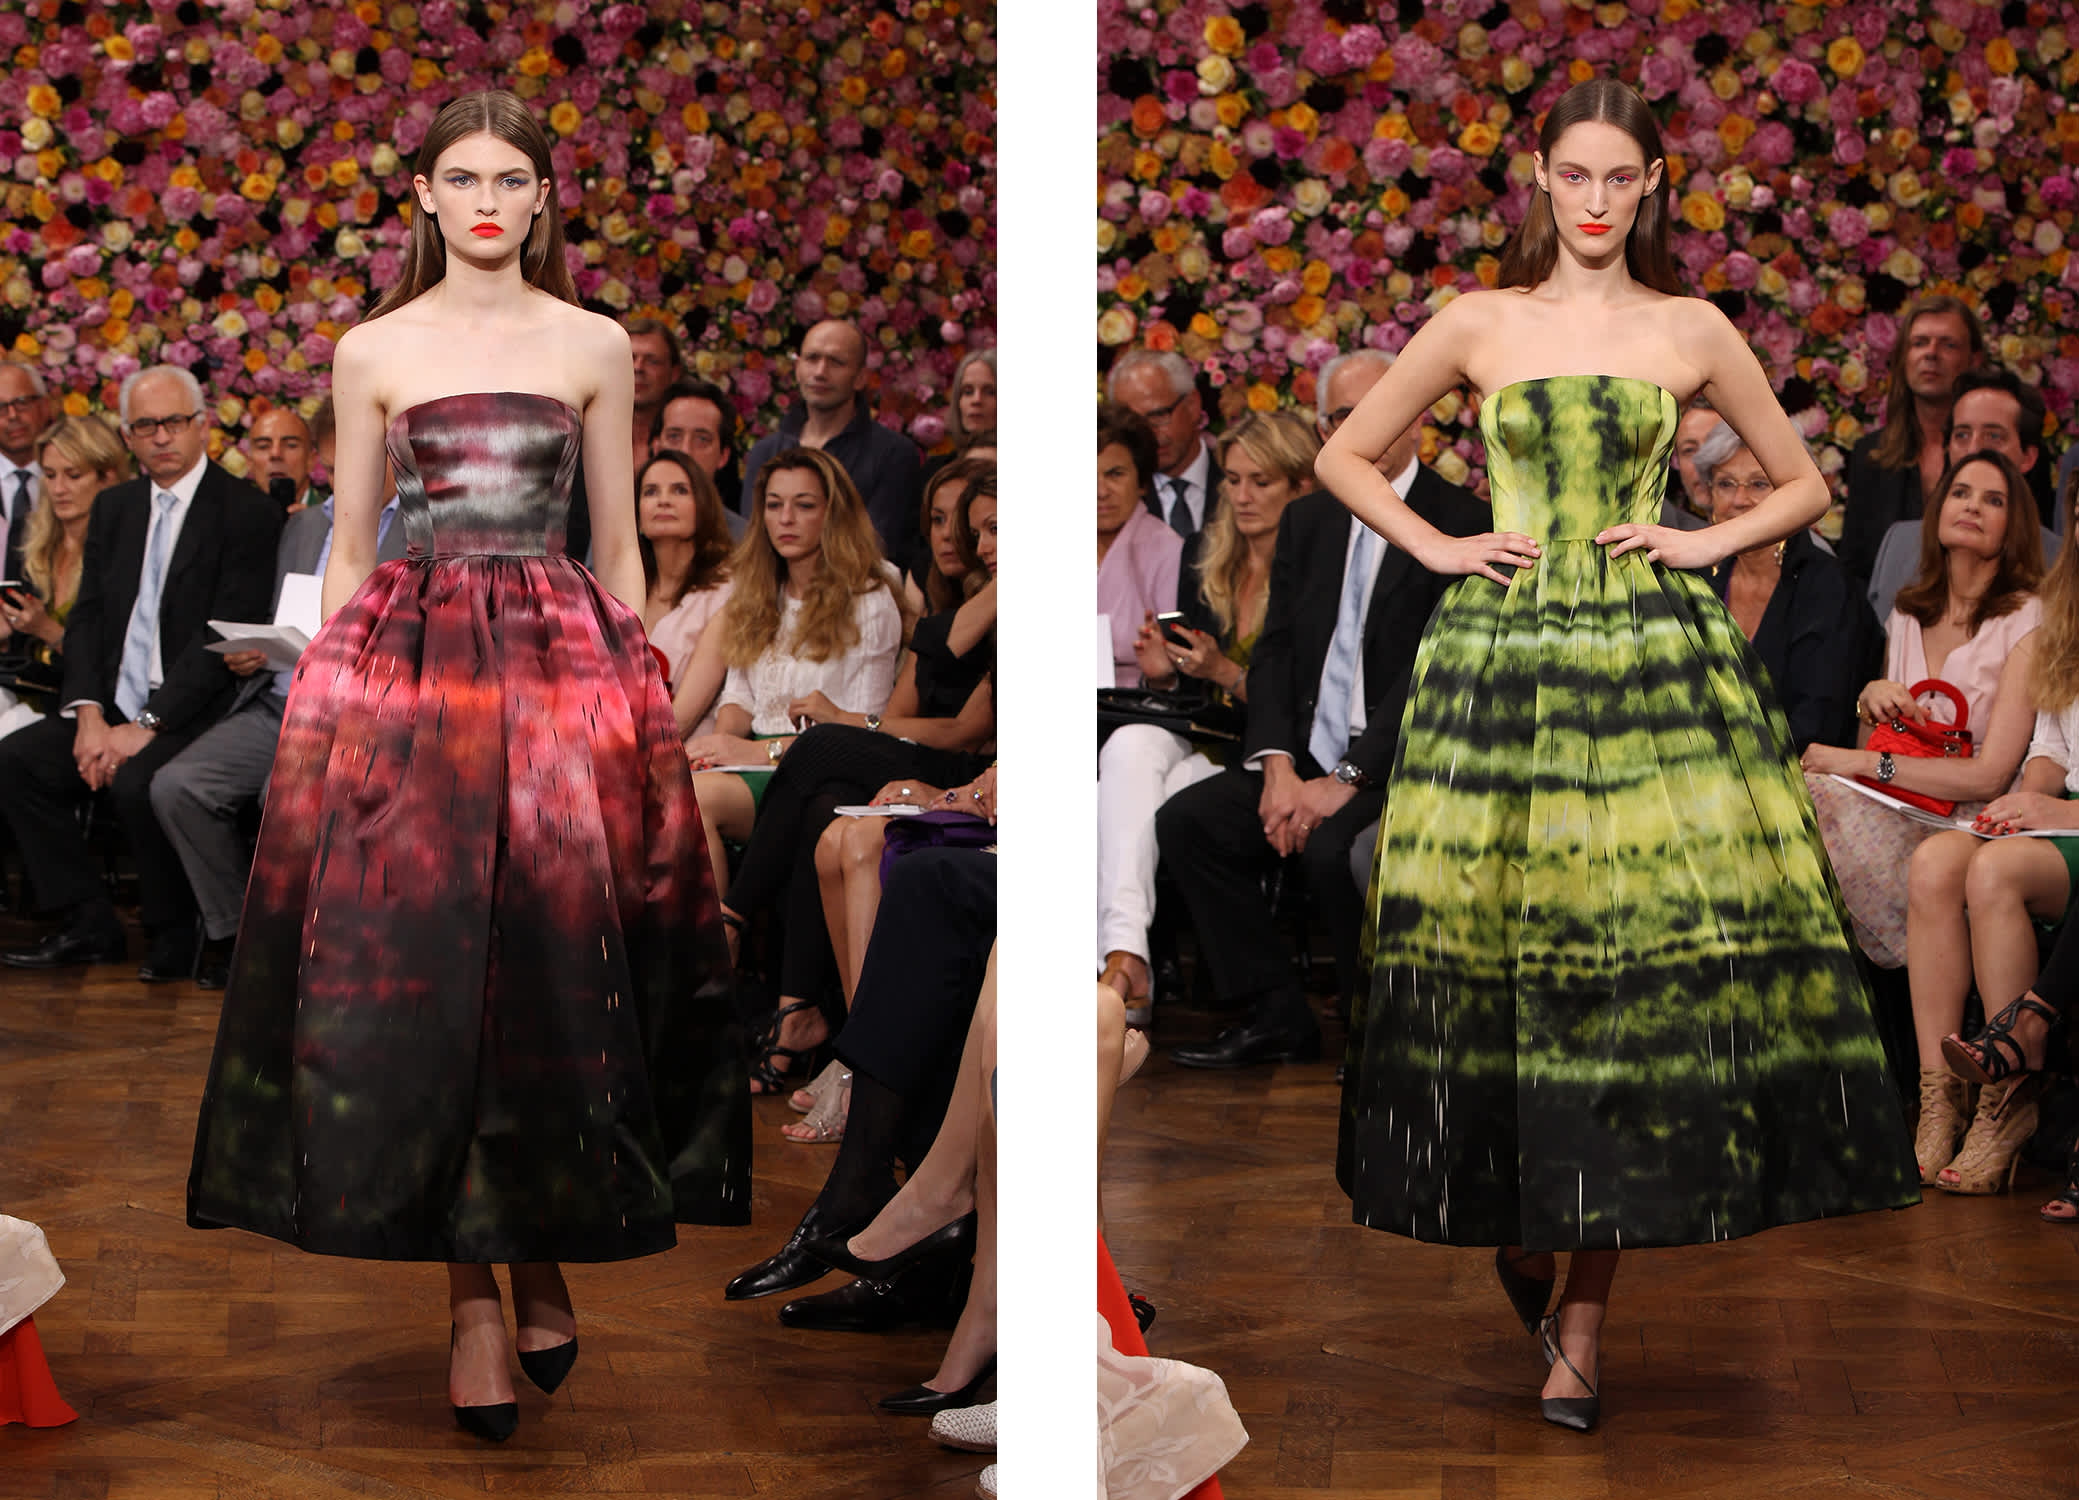 Dresses from Raf Simons's debut collection for Dior, featuring patterns from Sterling Ruby's art. Courtesy of Dior.